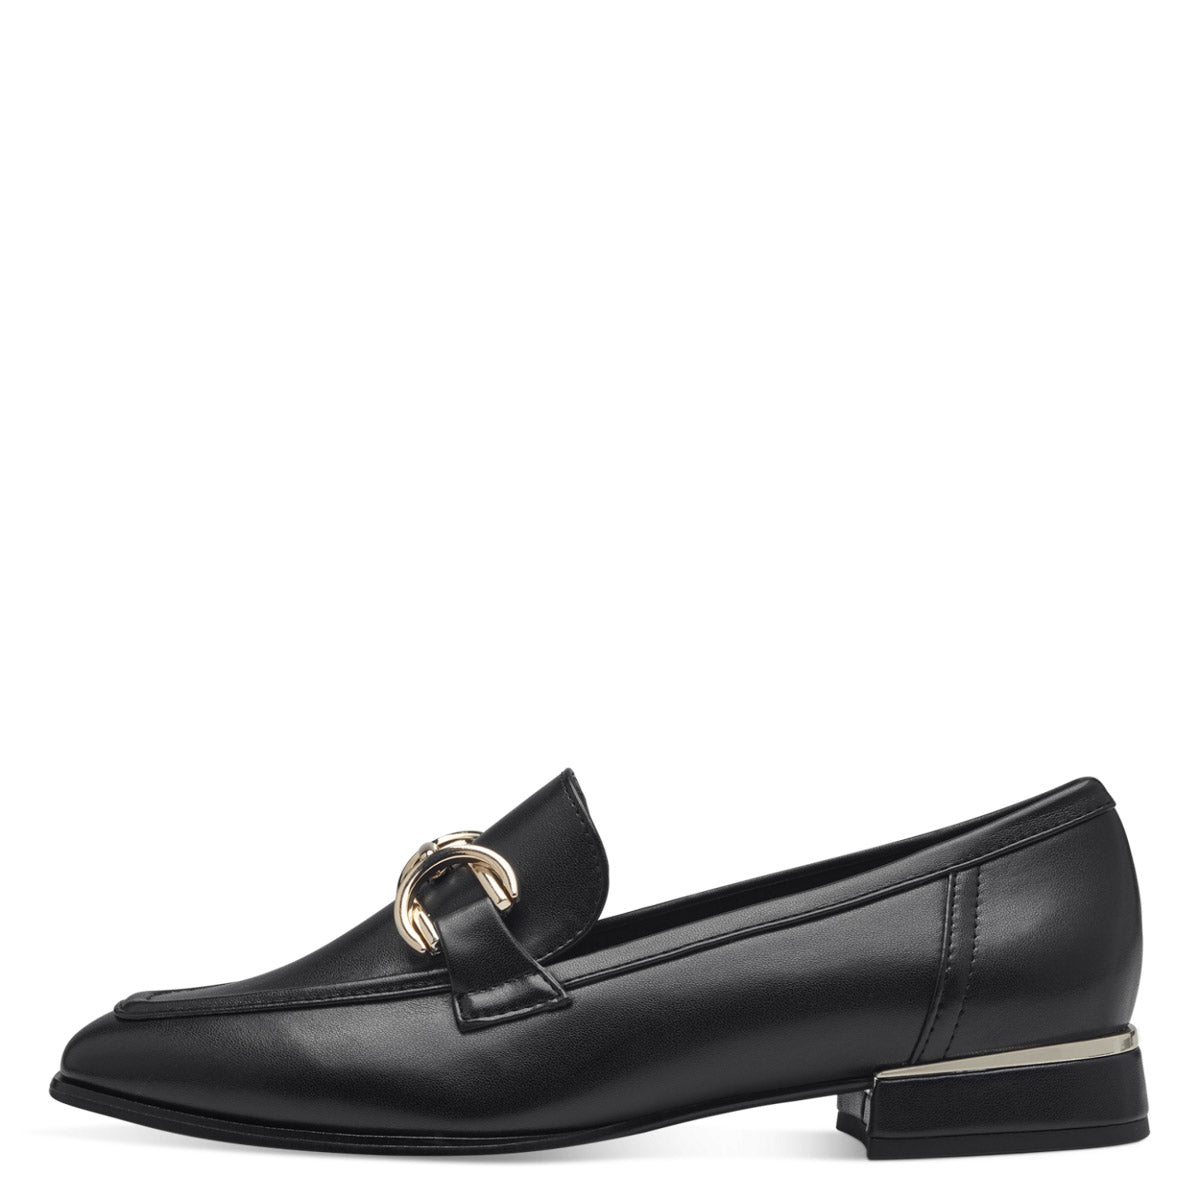 Front view of Marco Tozzi Black Loafer, highlighting its elegant black design.